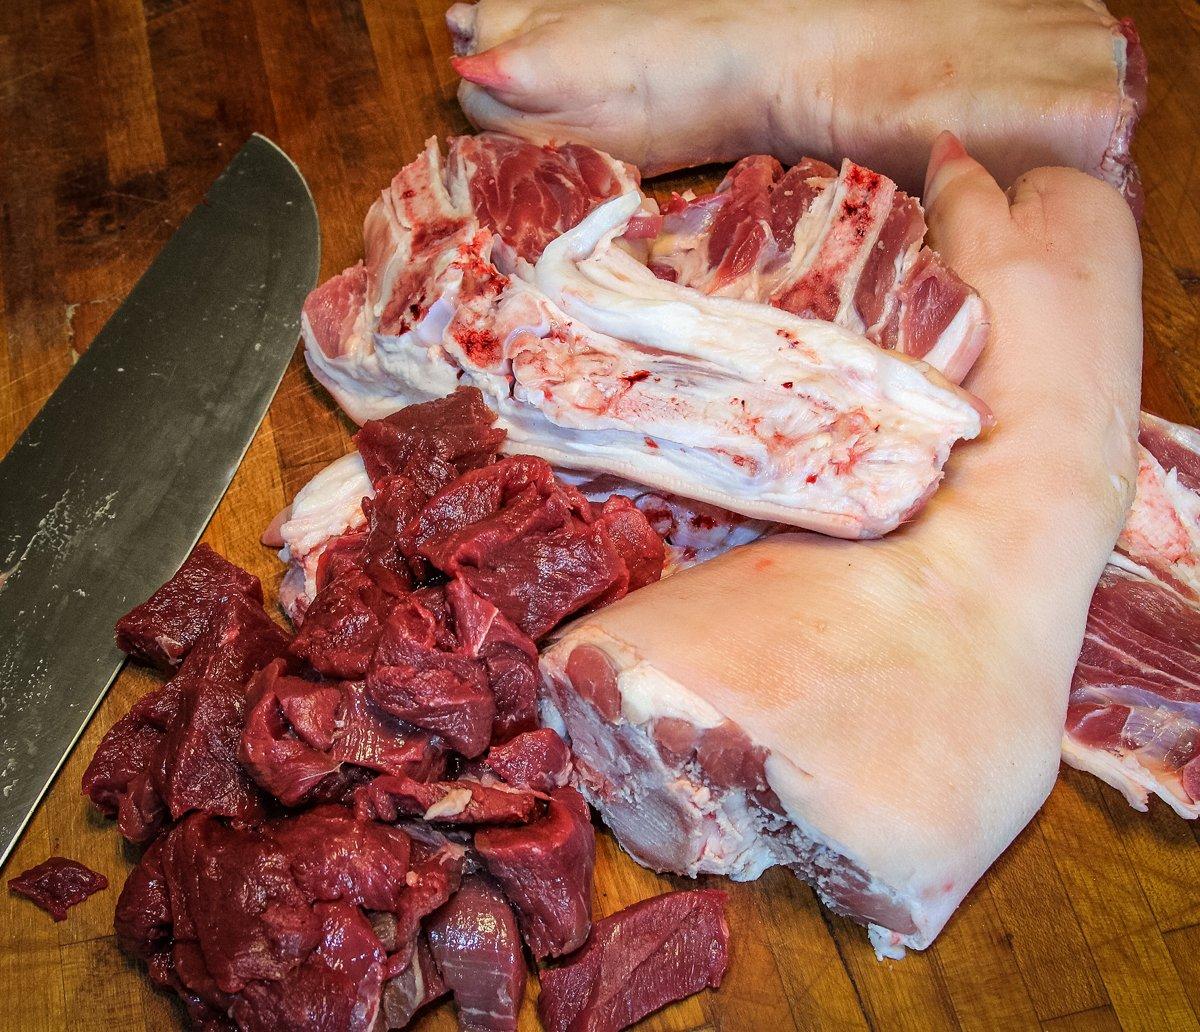 Start by cutting the venison into cubes and splitting the pork shanks down the center.